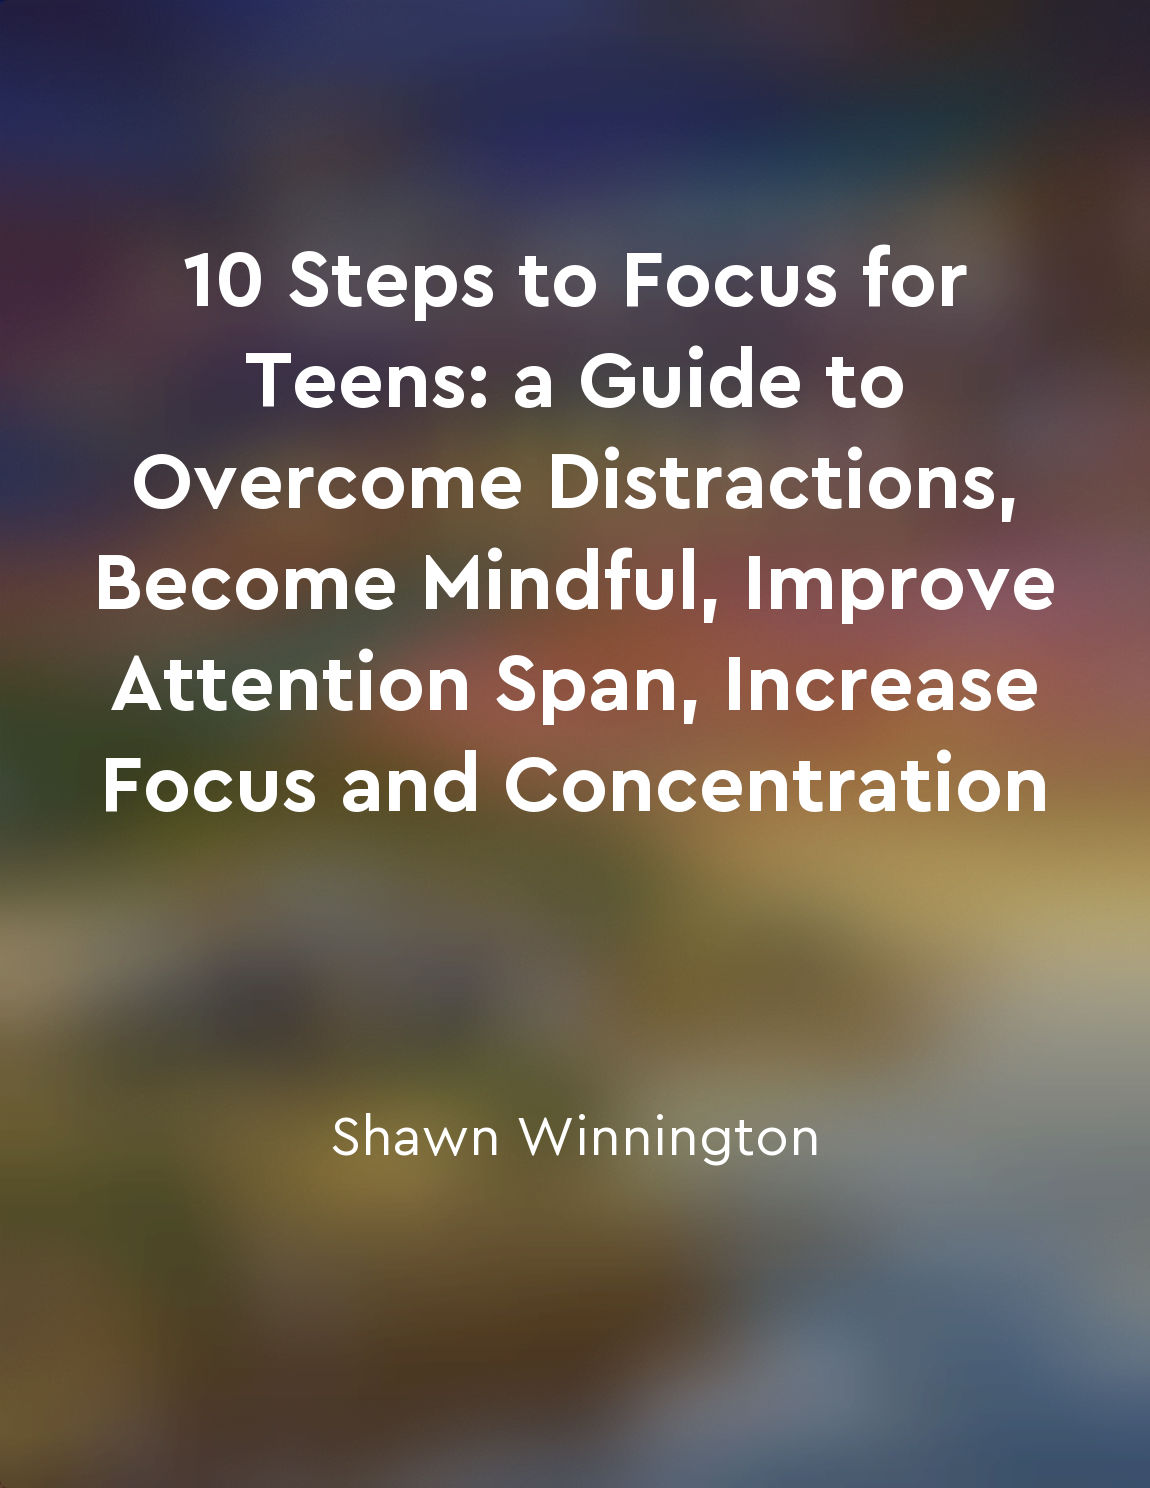 10 Steps to Focus for Teens: a Guide to Overcome Distractions, Become Mindful, Improve Attention Span, Increase Focus and Concentration